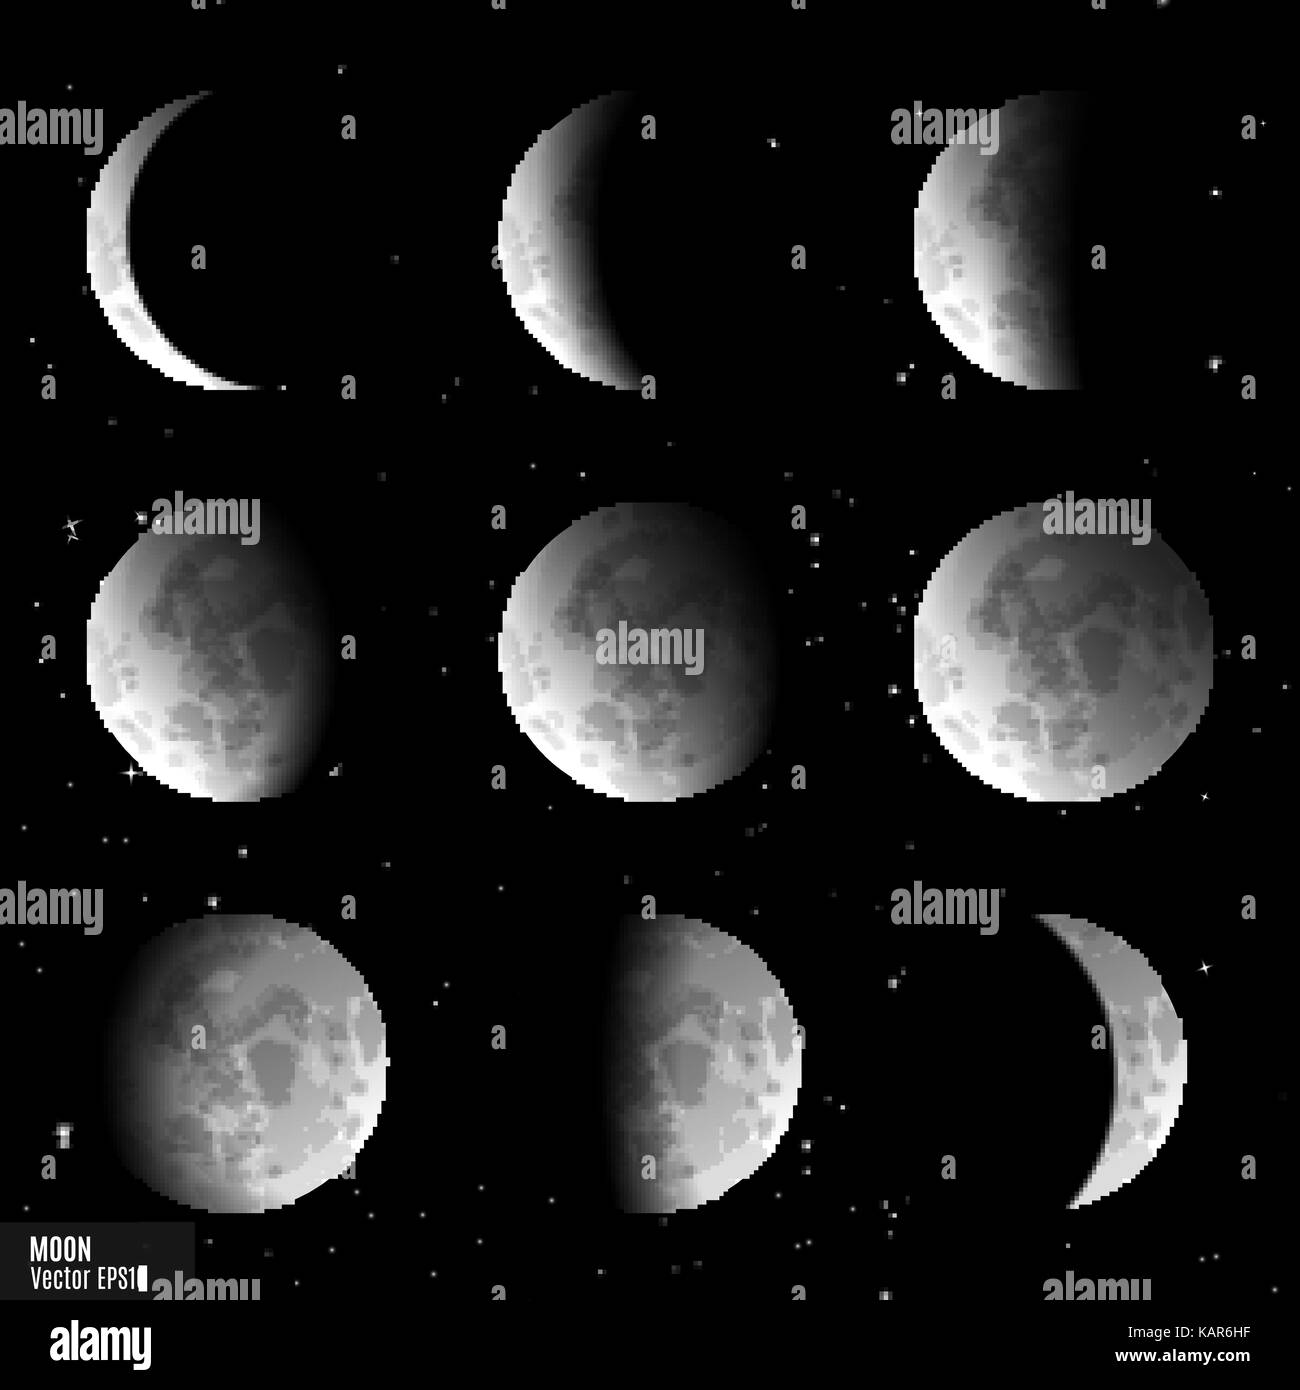 Moon set sequence Black and White Stock Photos & Images - Alamy